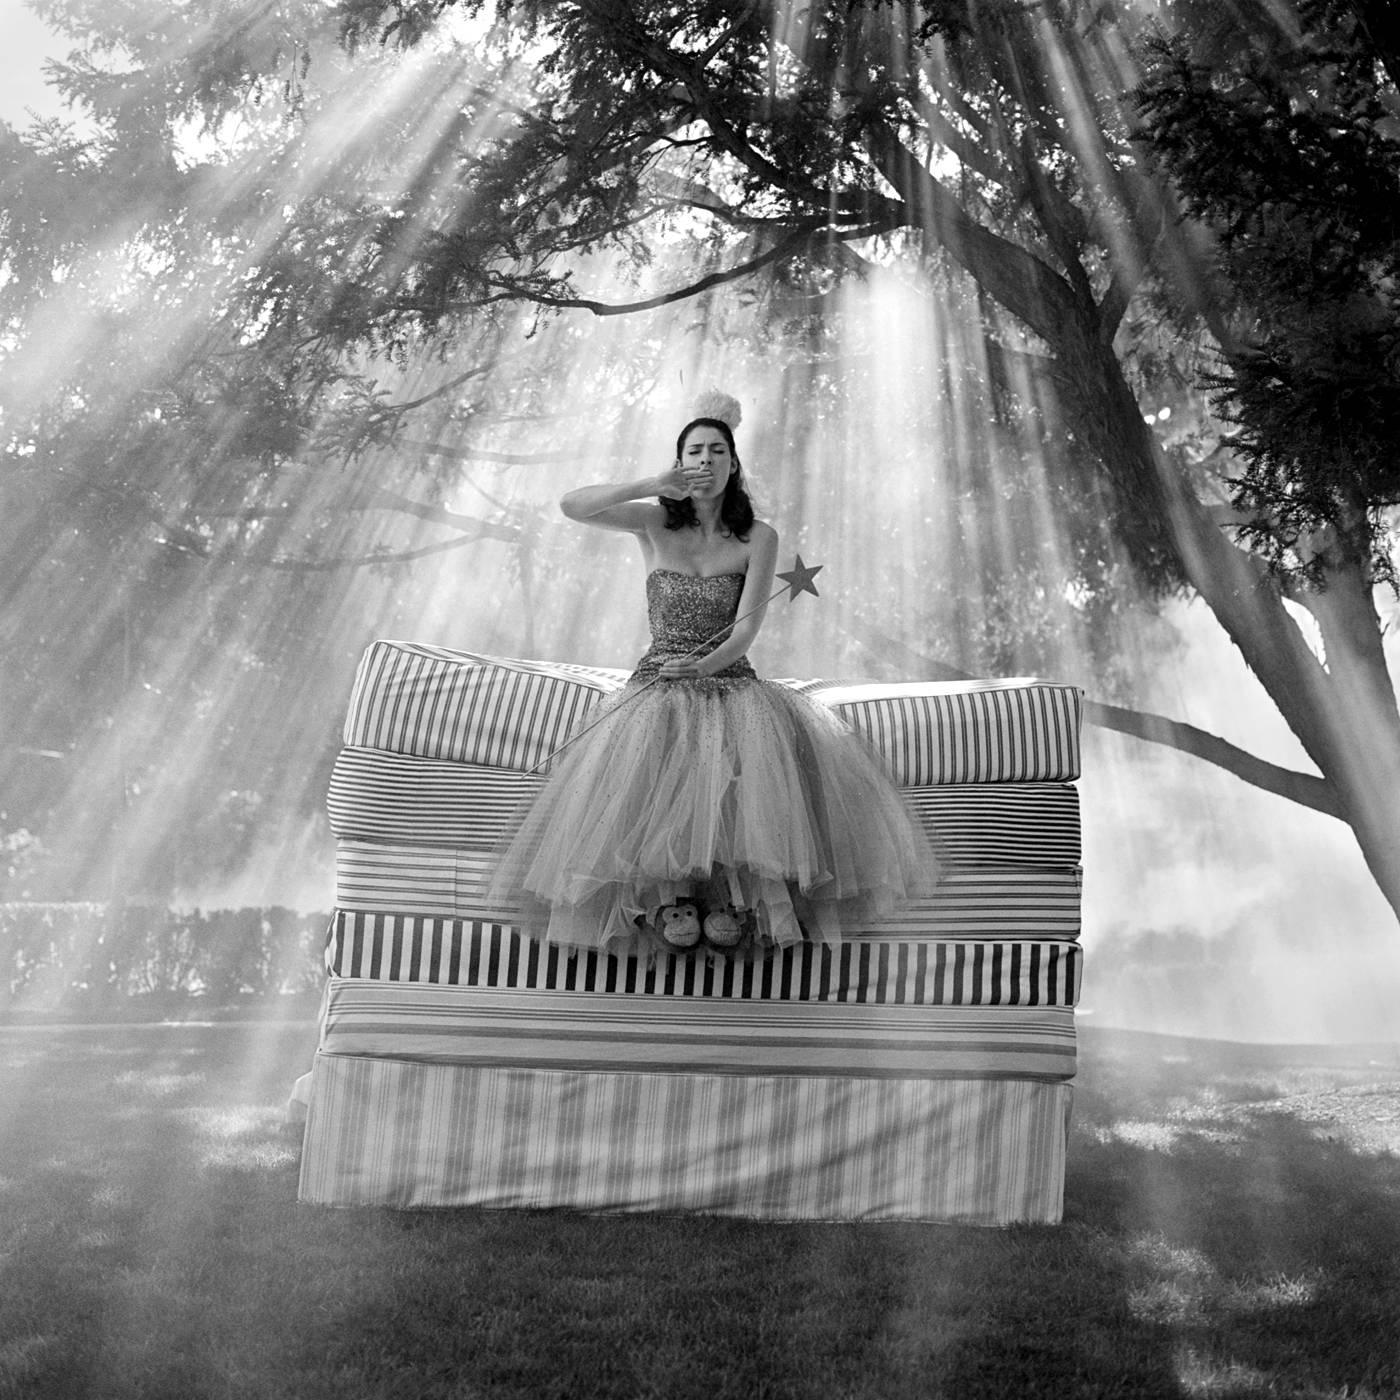 Rodney Smith Black and White Photograph - Zoe on Top of Mattress Stack- black and white 20x 20 inch fashion photograph